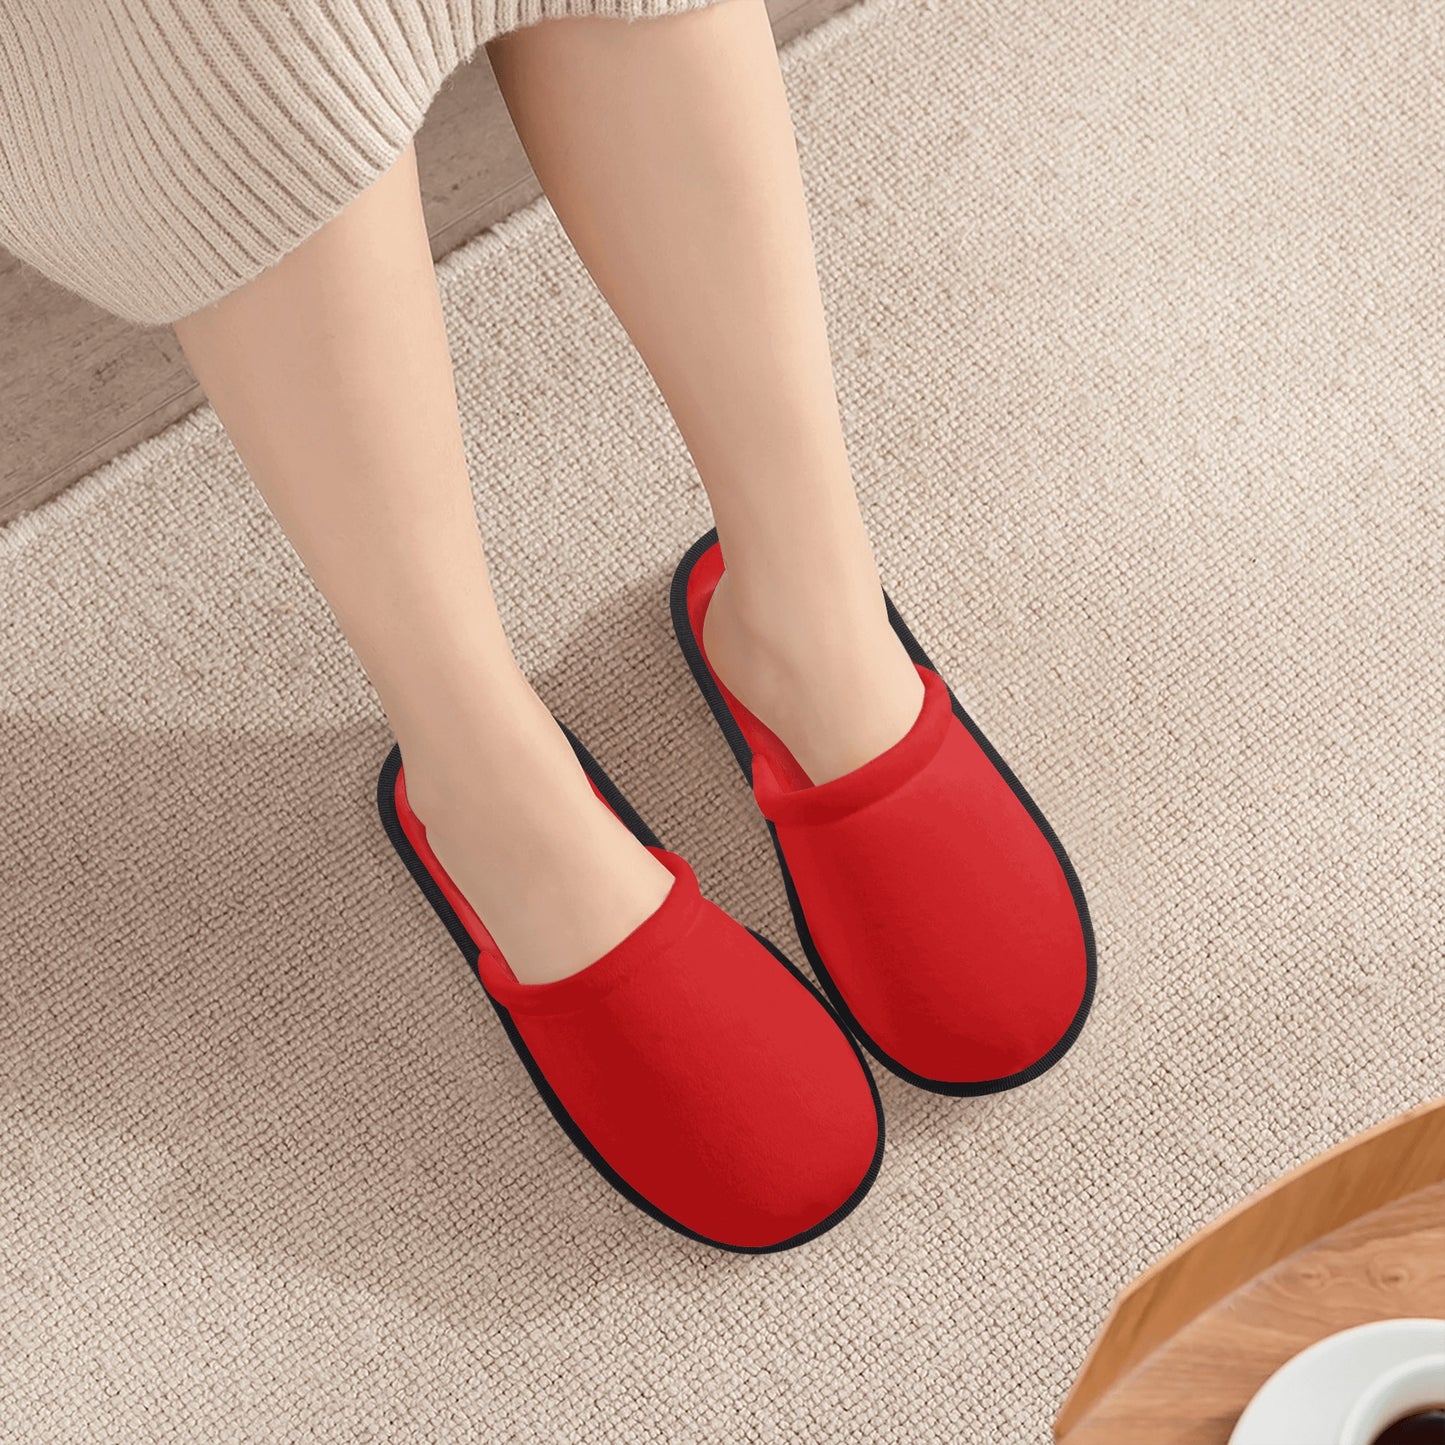 T4x Red Hotel Plush Slippers